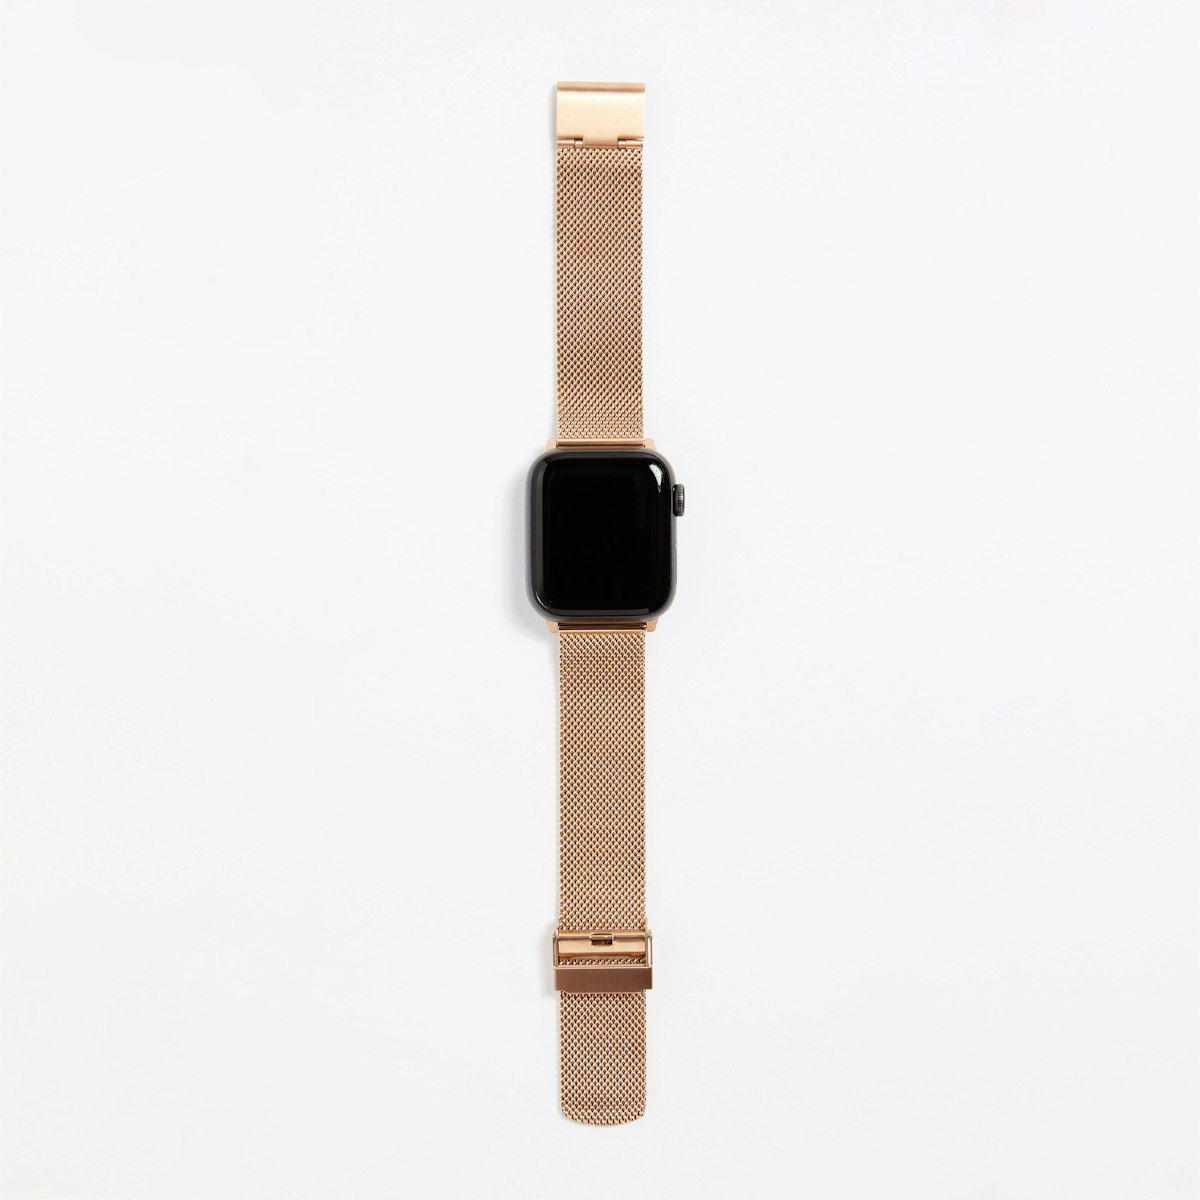 Apple_WatchBand_StainlessSteel_Mesh_RoseGold_Large_1x1_FRONTWITHWATCH_0212.jpg